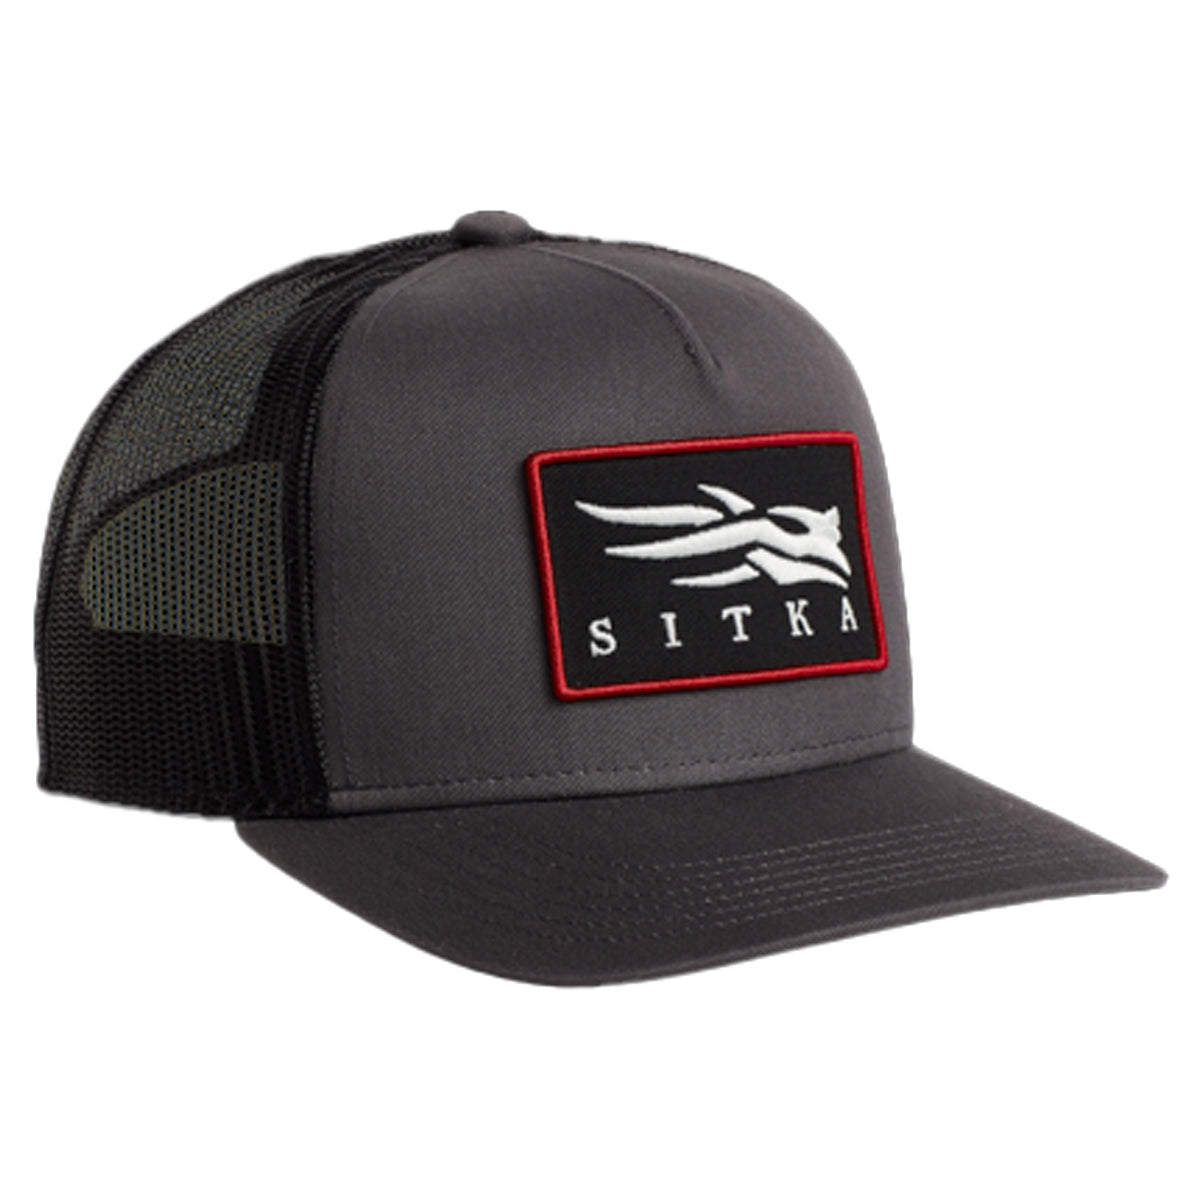 Sitka ICON Patch Hi Pro Trucker in Lead by GOHUNT | Sitka - GOHUNT Shop